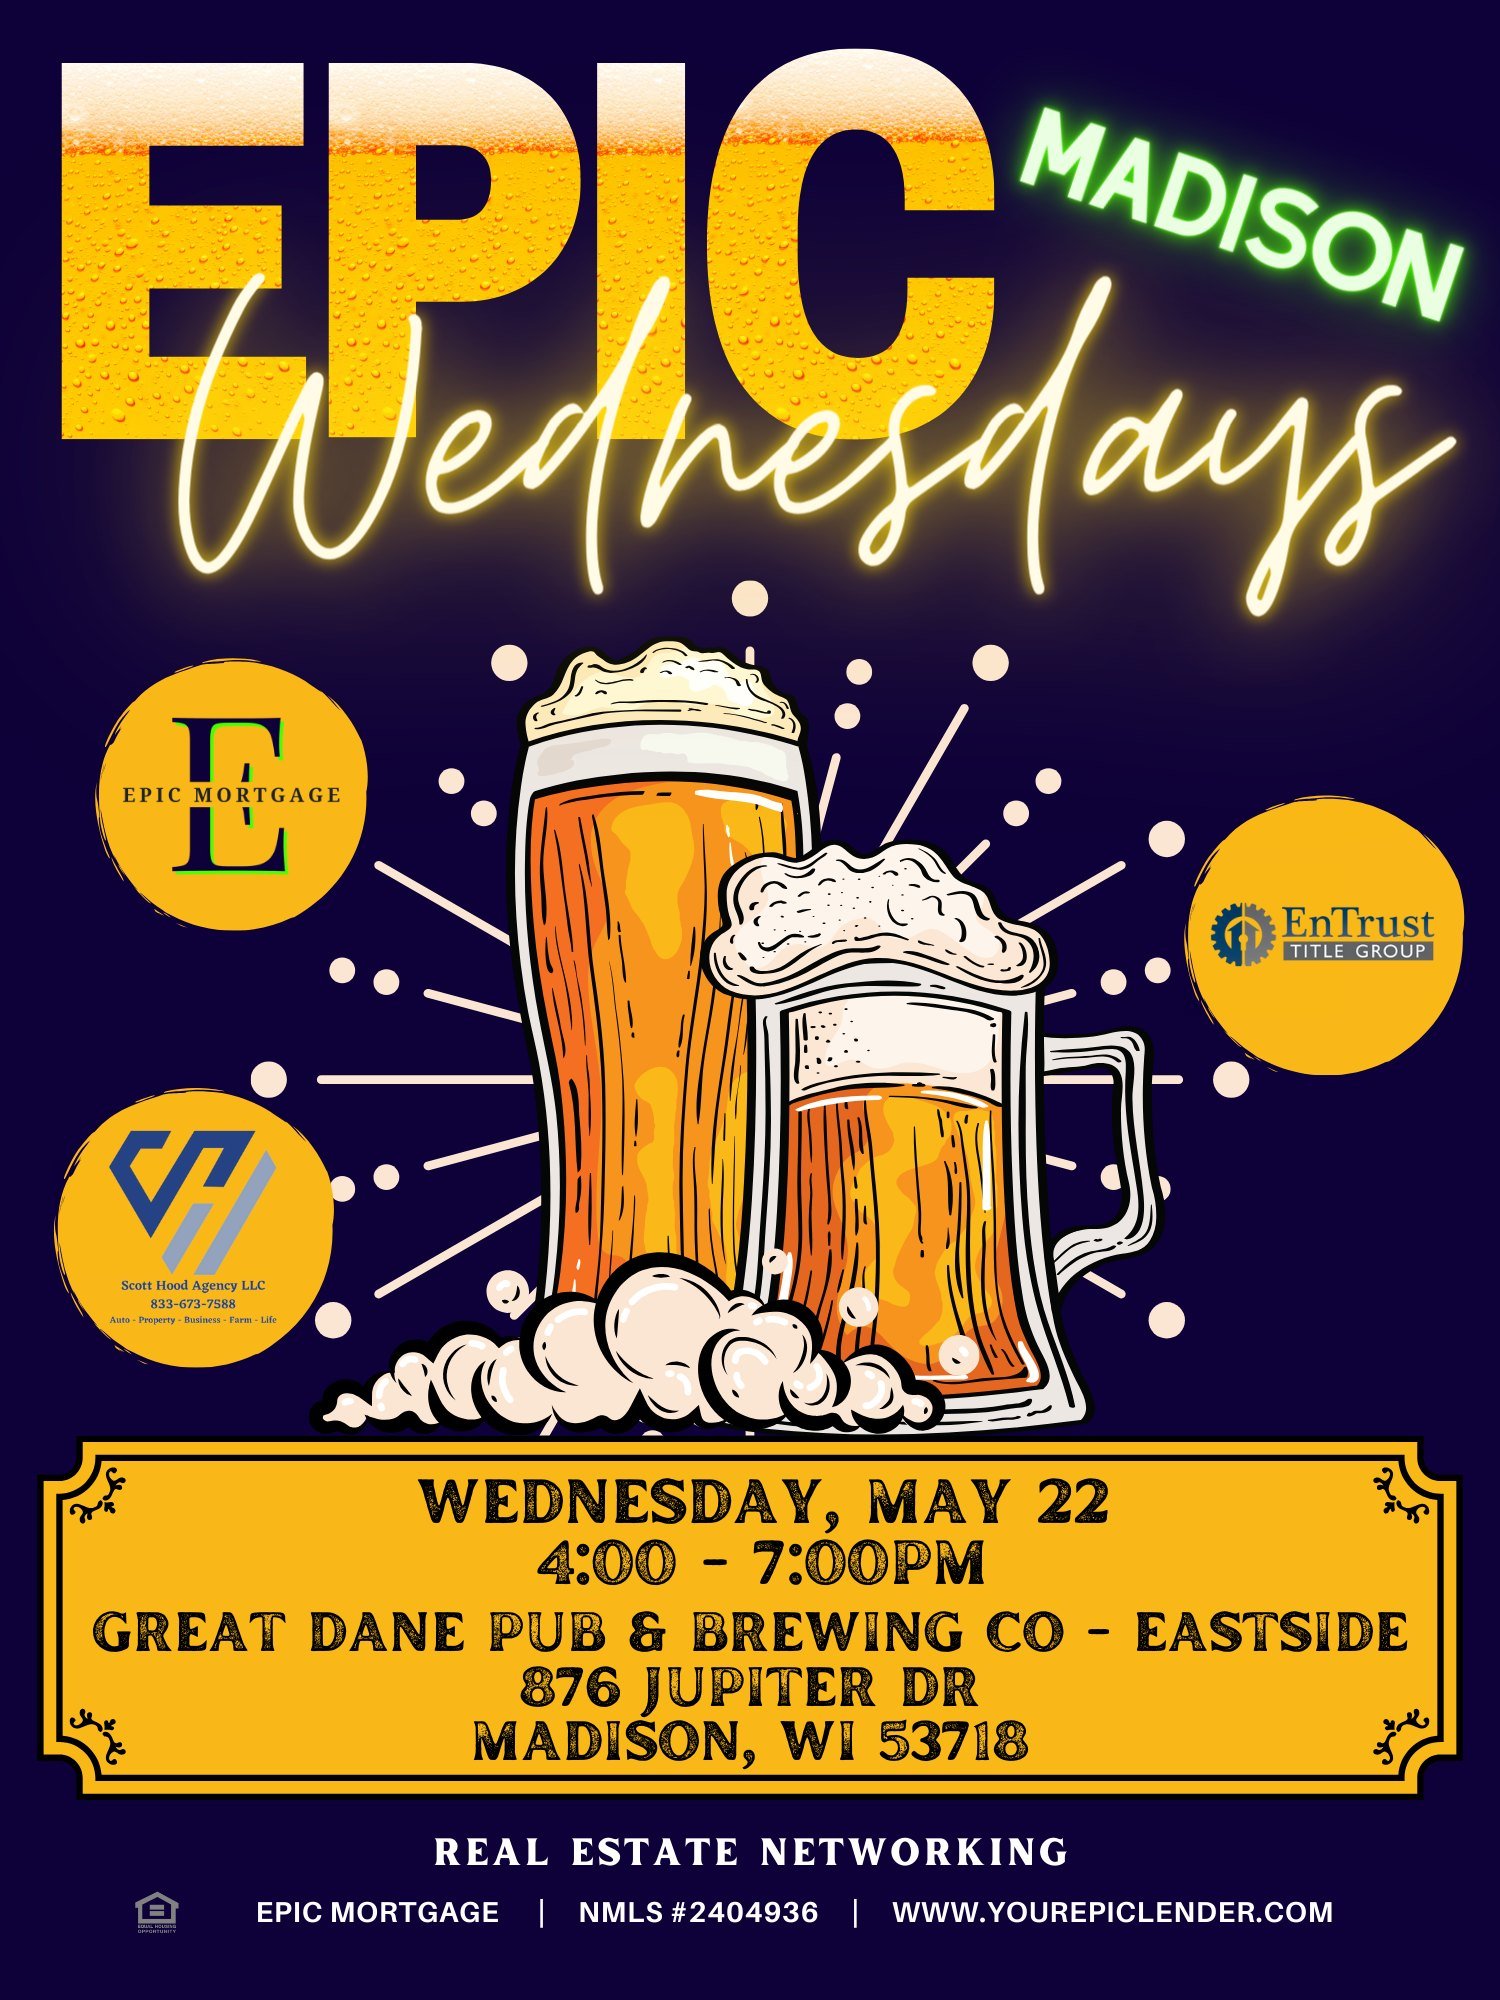 🍻Epic Wednesday MADISON!🍻

We're so excited to be holding our very first Epic Wednesday for Madison area real estate professionals!  Stop by Great Dane Pub &amp; Brewing Co - Eastside to chat with your favorite Epic Loan Officers, or come meet some